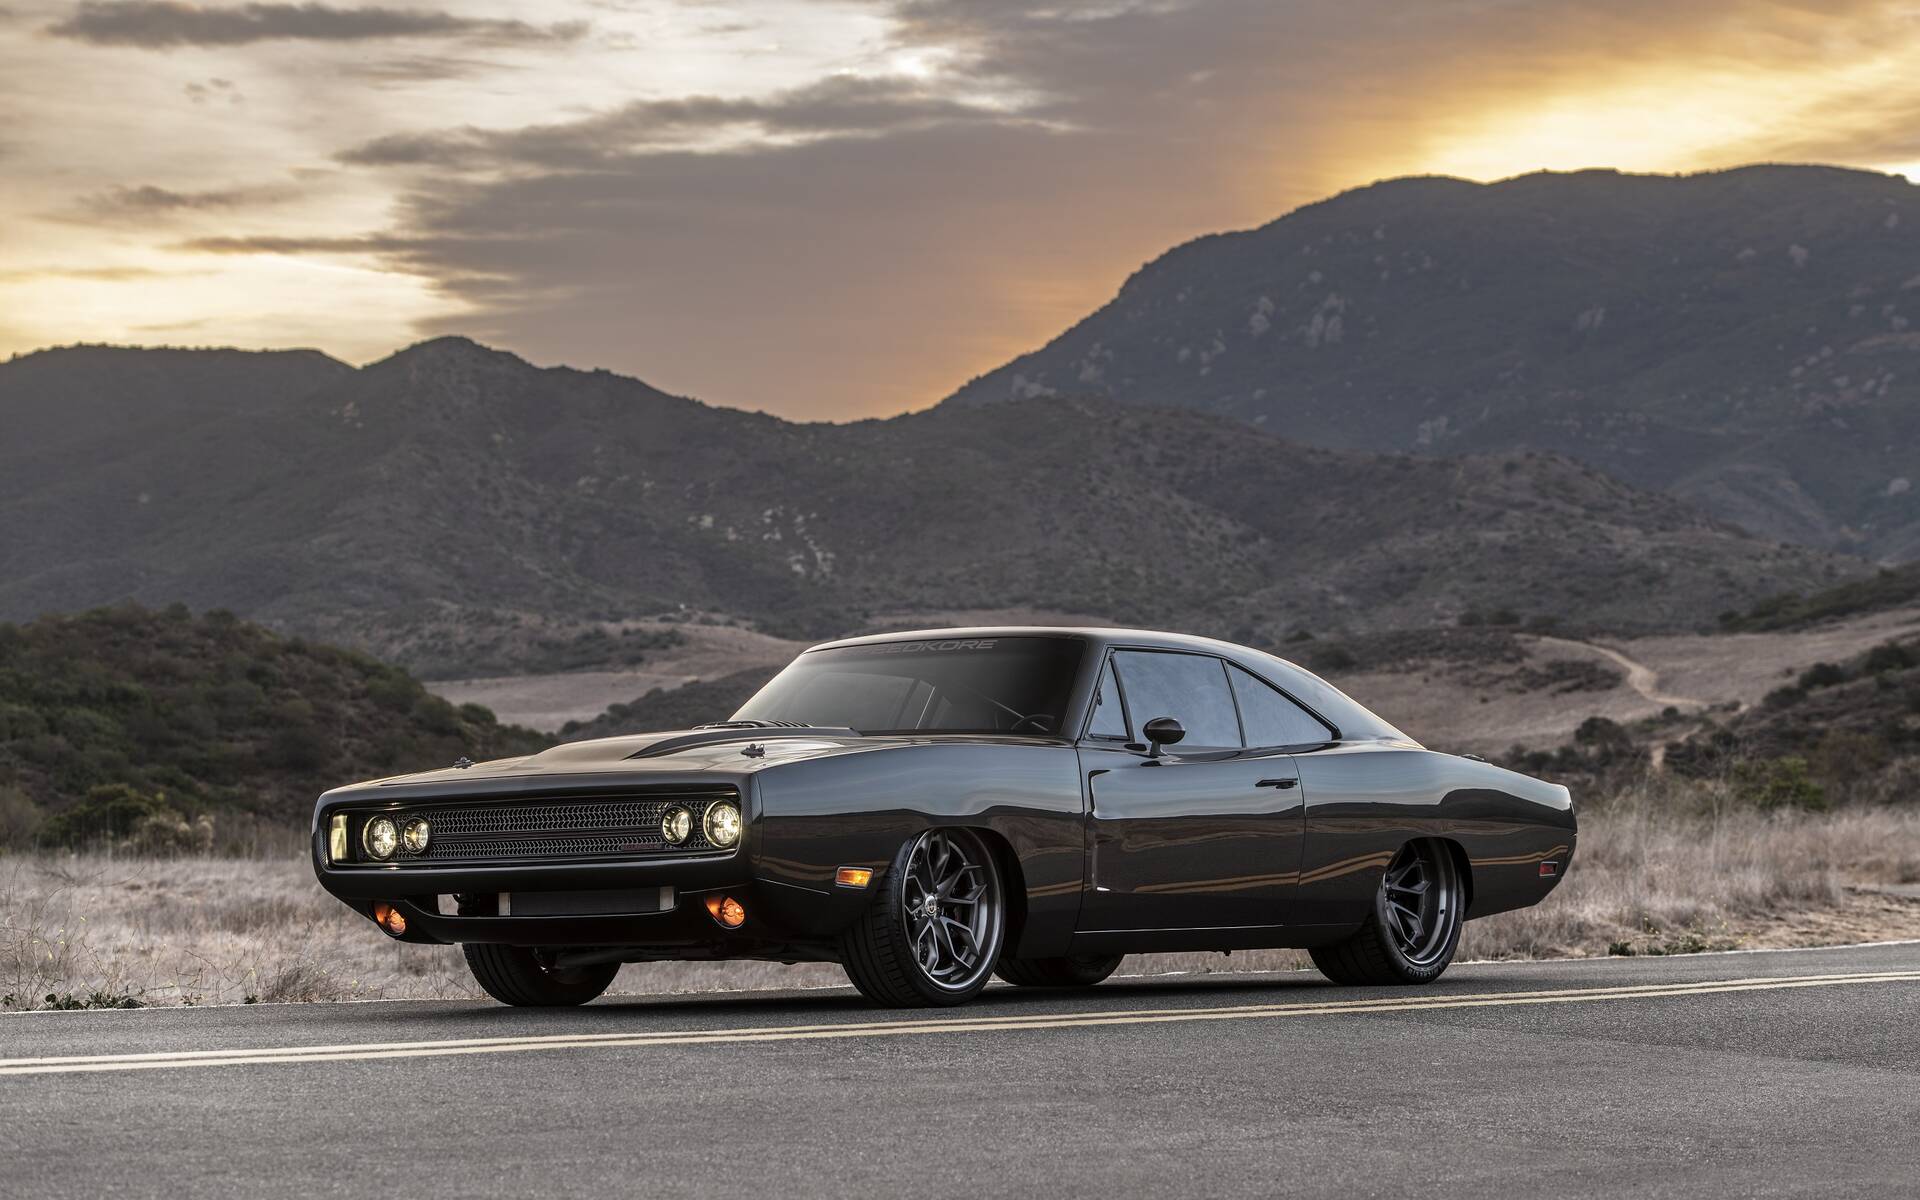 Carbon Fibrebodied 1970 Dodge Charger With 1,000 Hp Raises Hell The